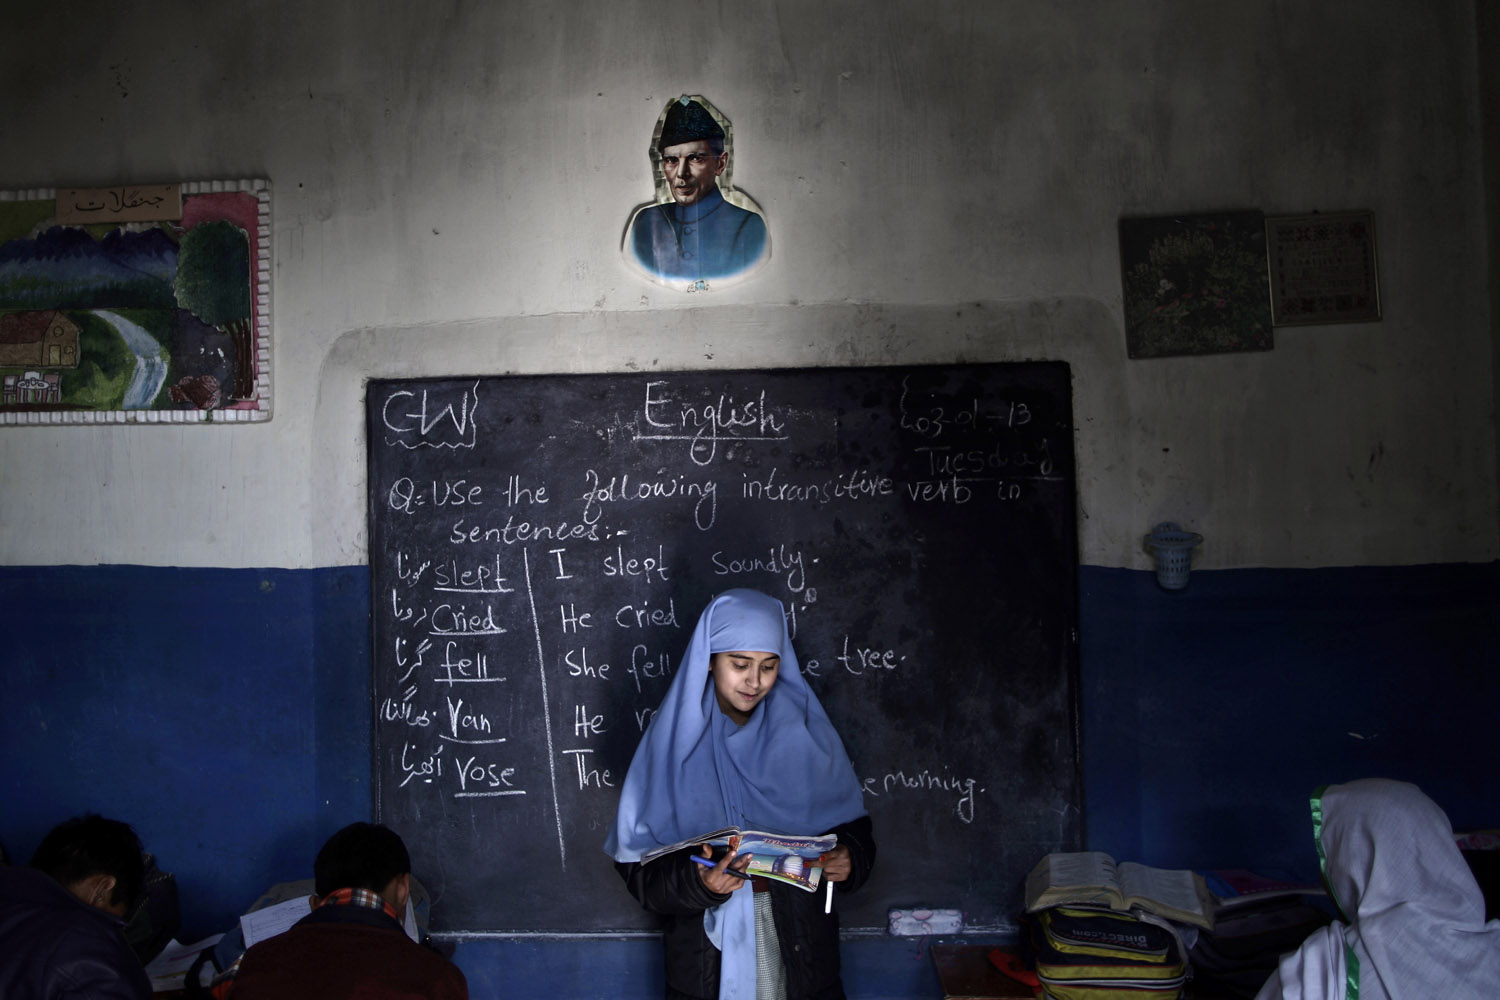 Jan. 3, 2013. Pakistani schoolgirl, Sadia Mukhteya, 12, who was displaced with her family from Pakistan's tribal areas due to fighting between militants and the army, reads in front of the class during an English language class at a school on the outskirts of Islamabad.